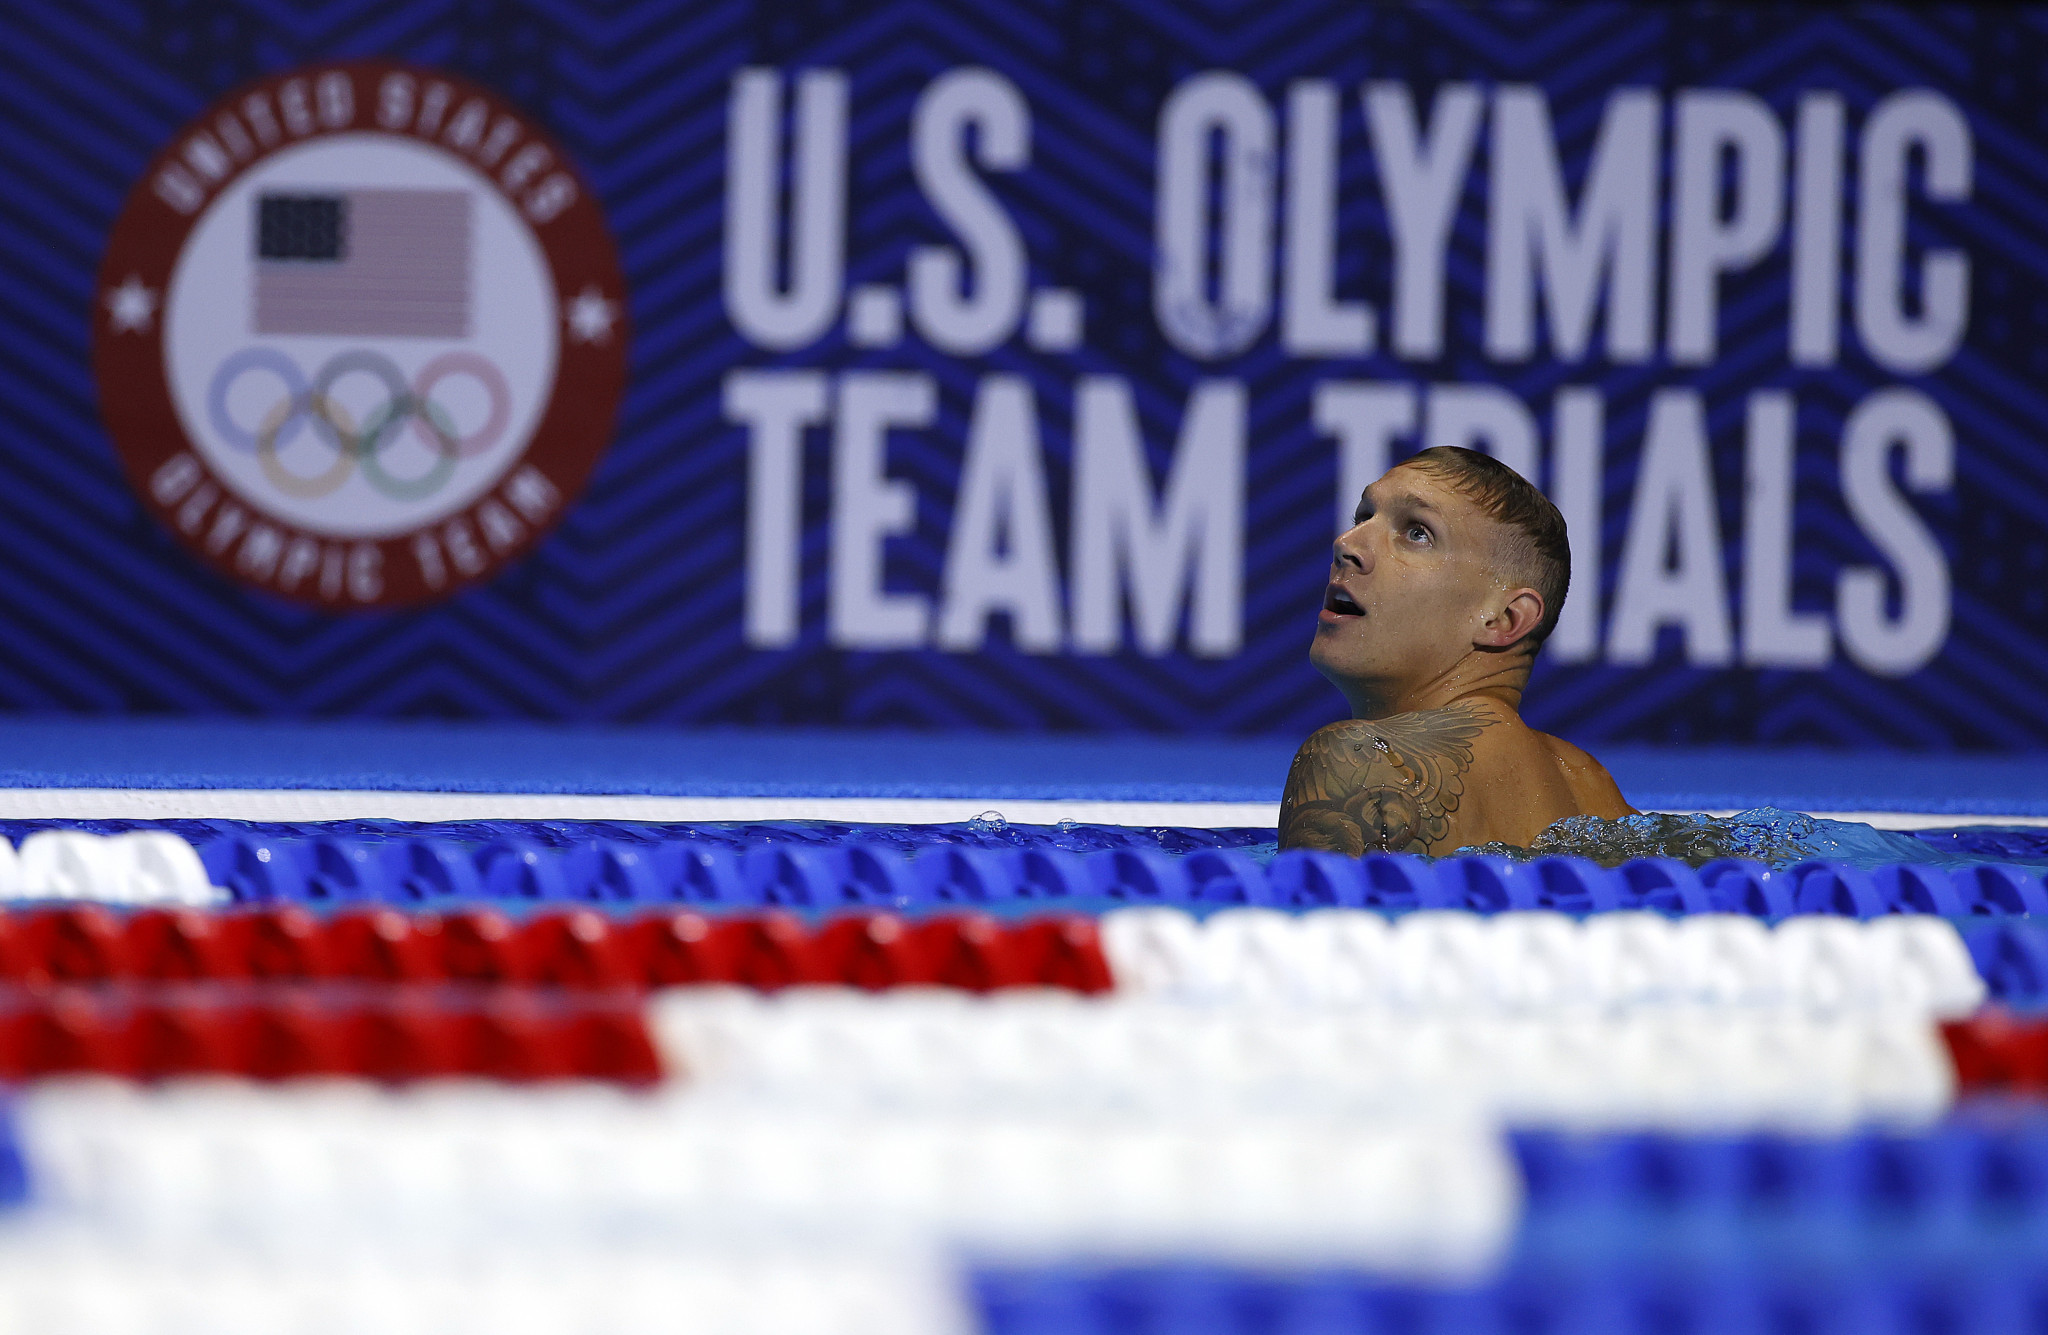 Omaha had staged the last five editions of the US Olympic swimming trials, including for Tokyo 2020 ©Getty Images